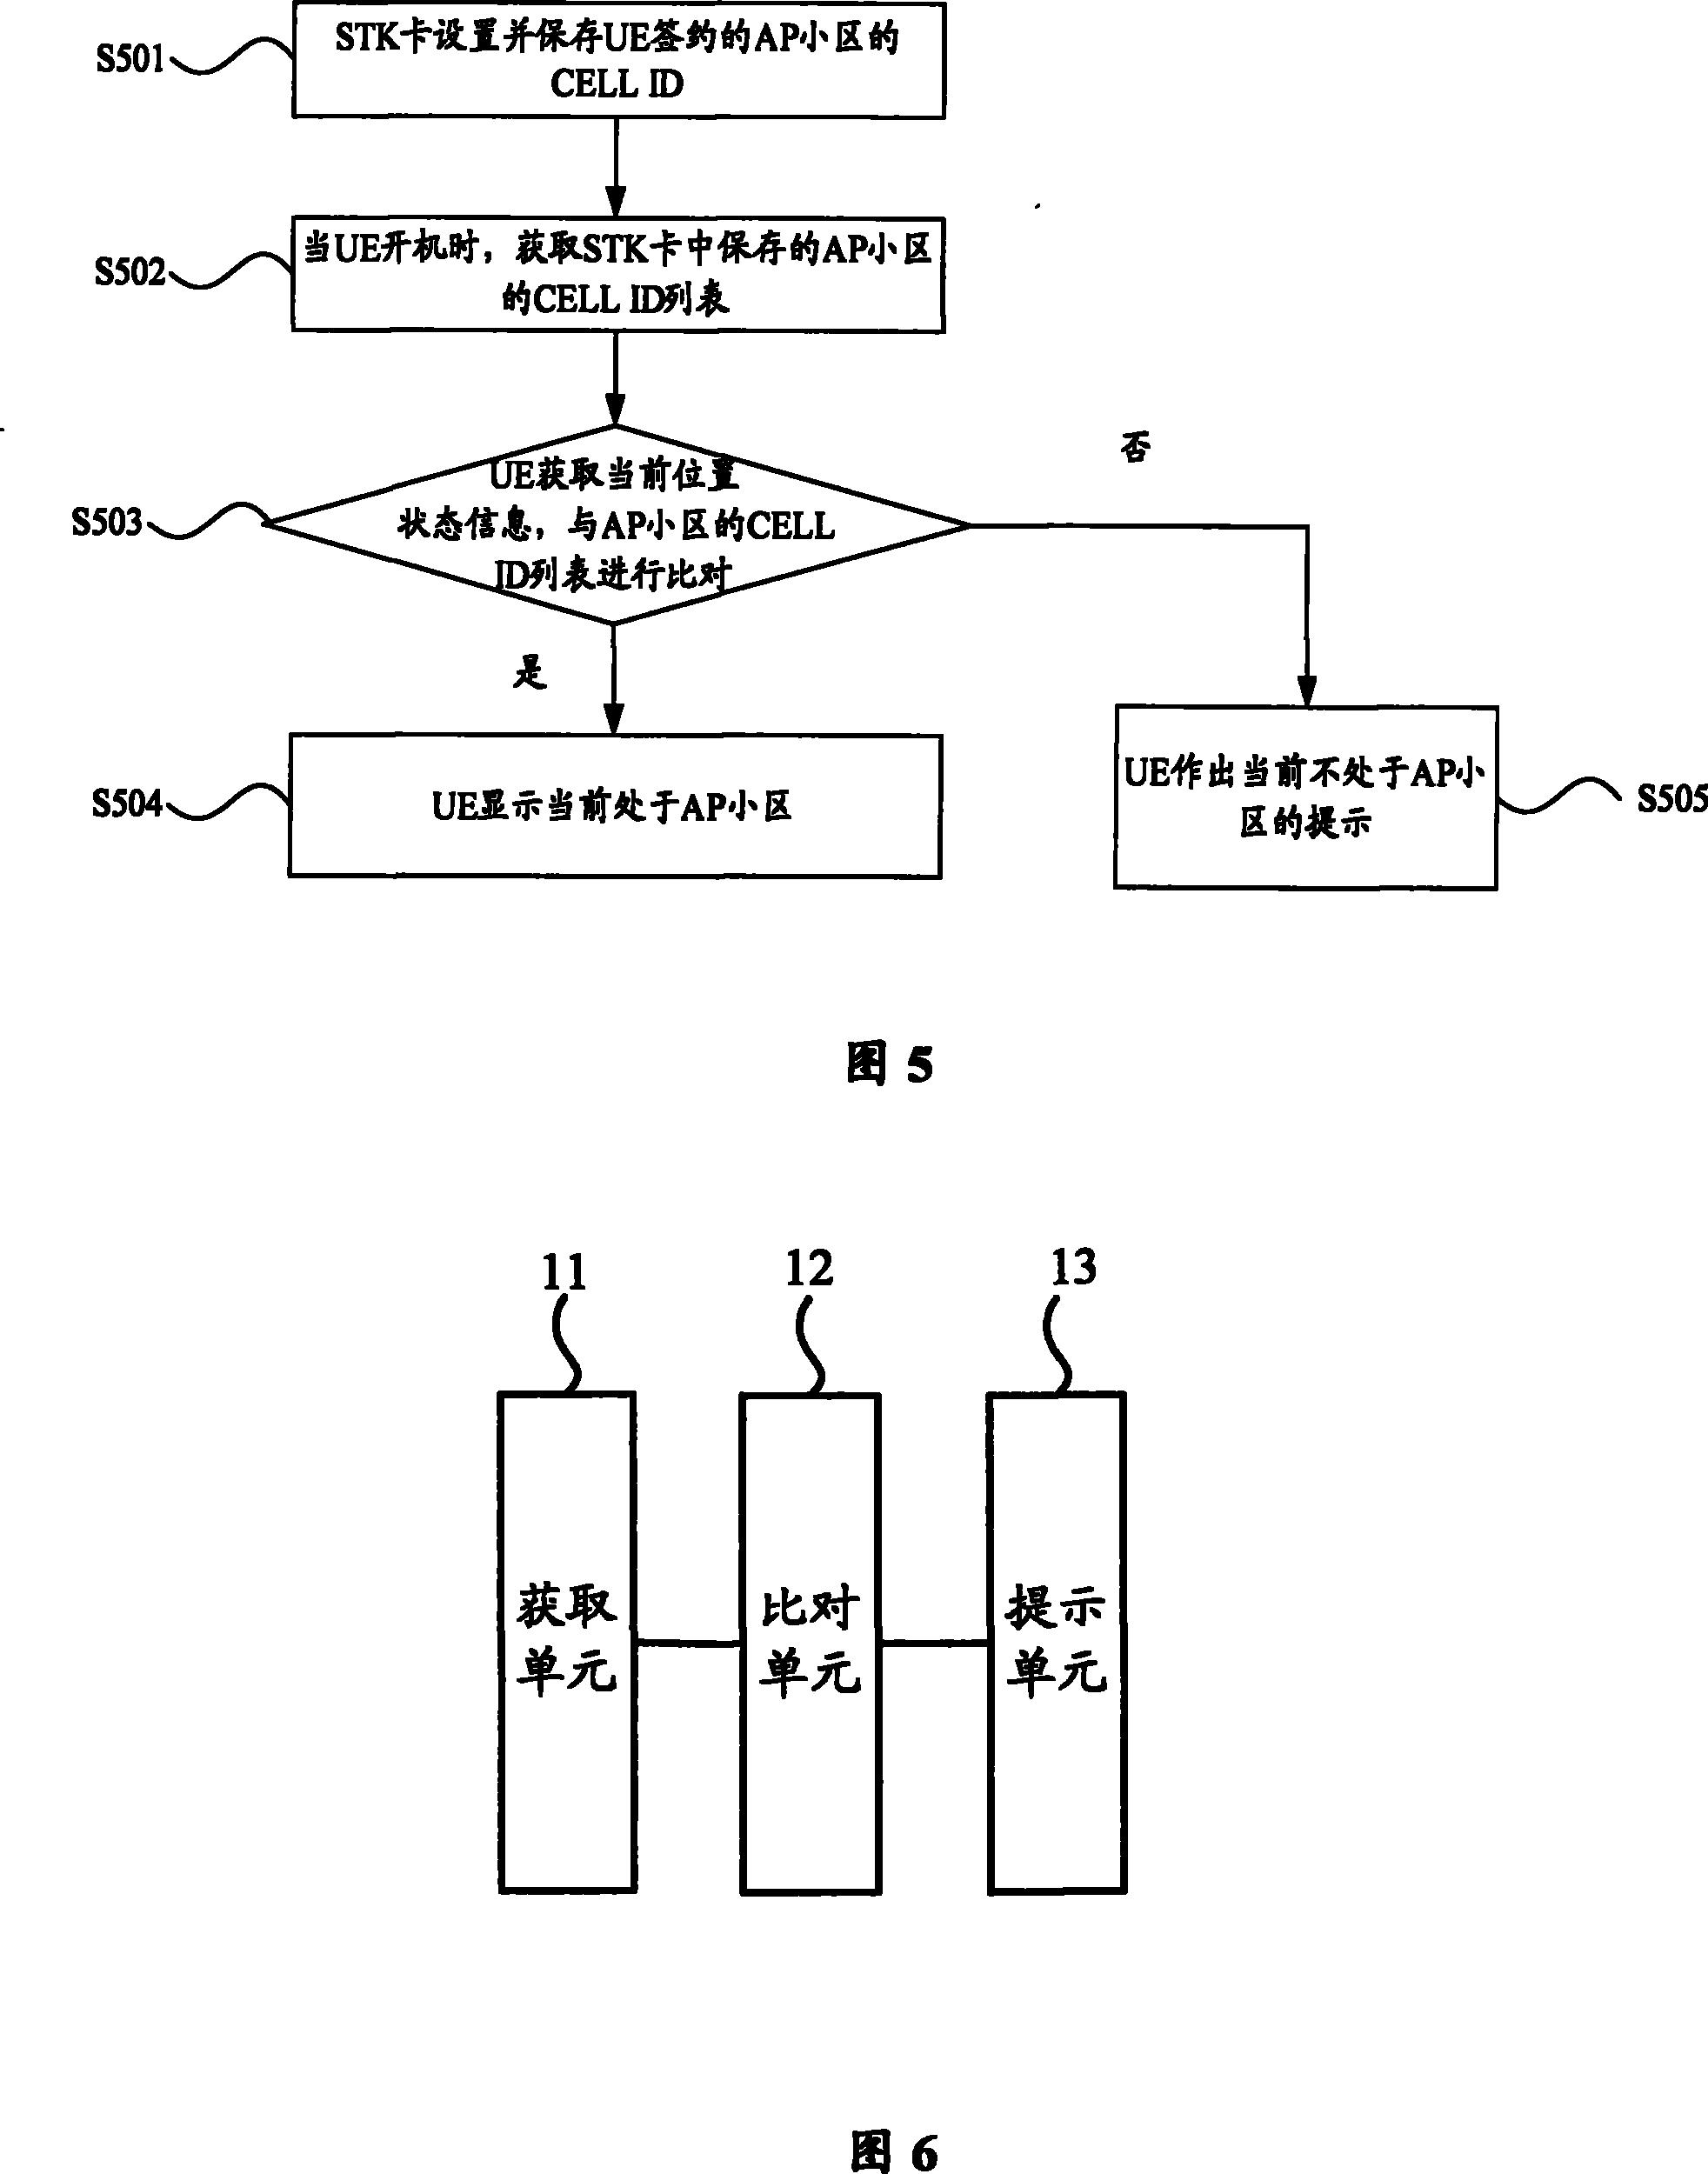 Method and device for reminding subscriber terminal of being in AP subdistrict